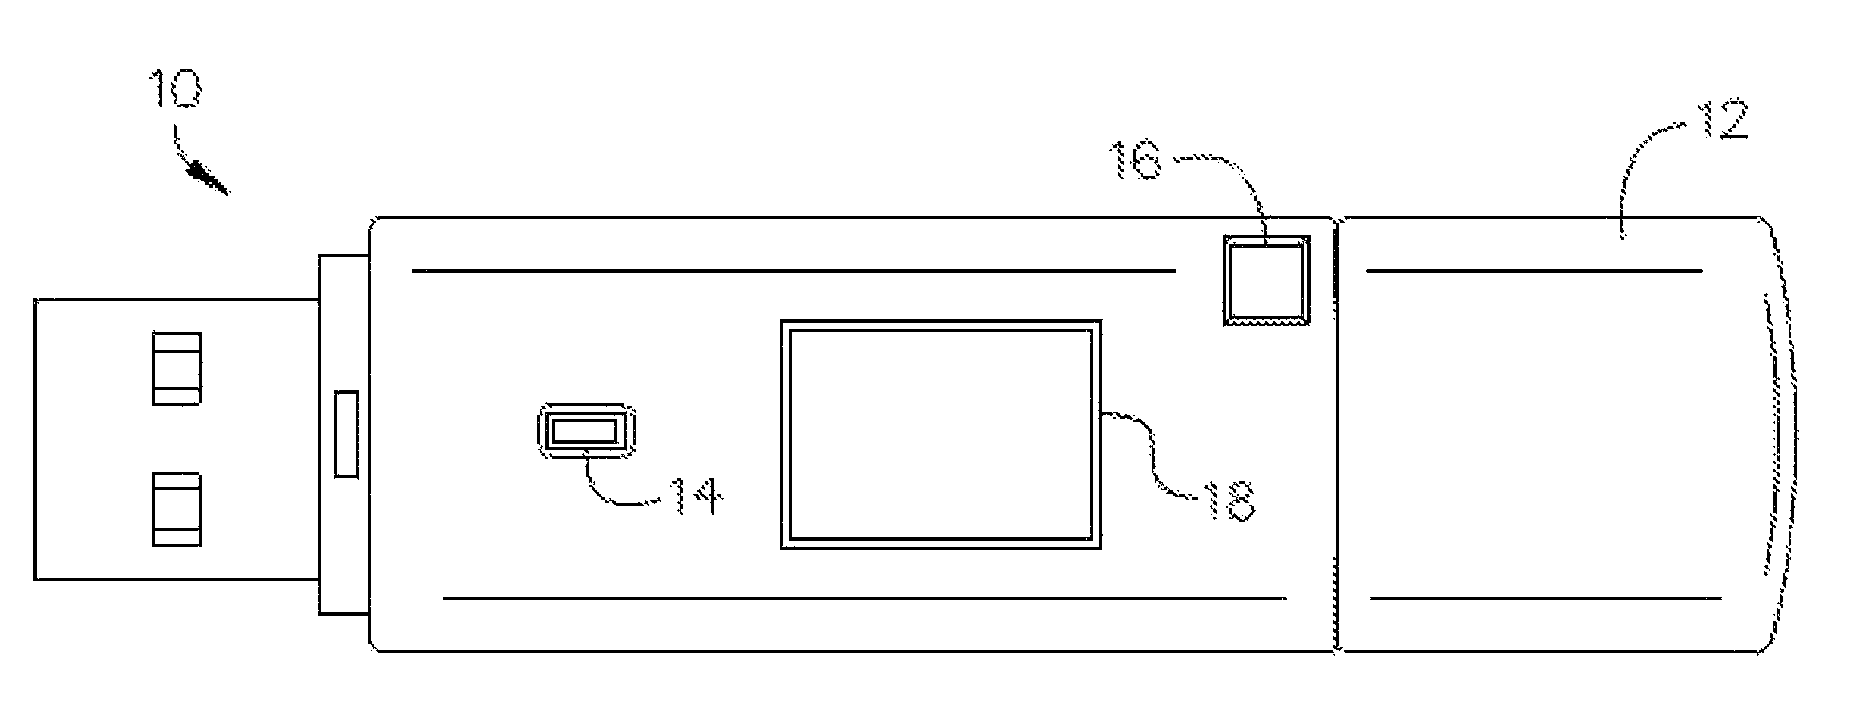 Encrypted mass-storage device with self running application